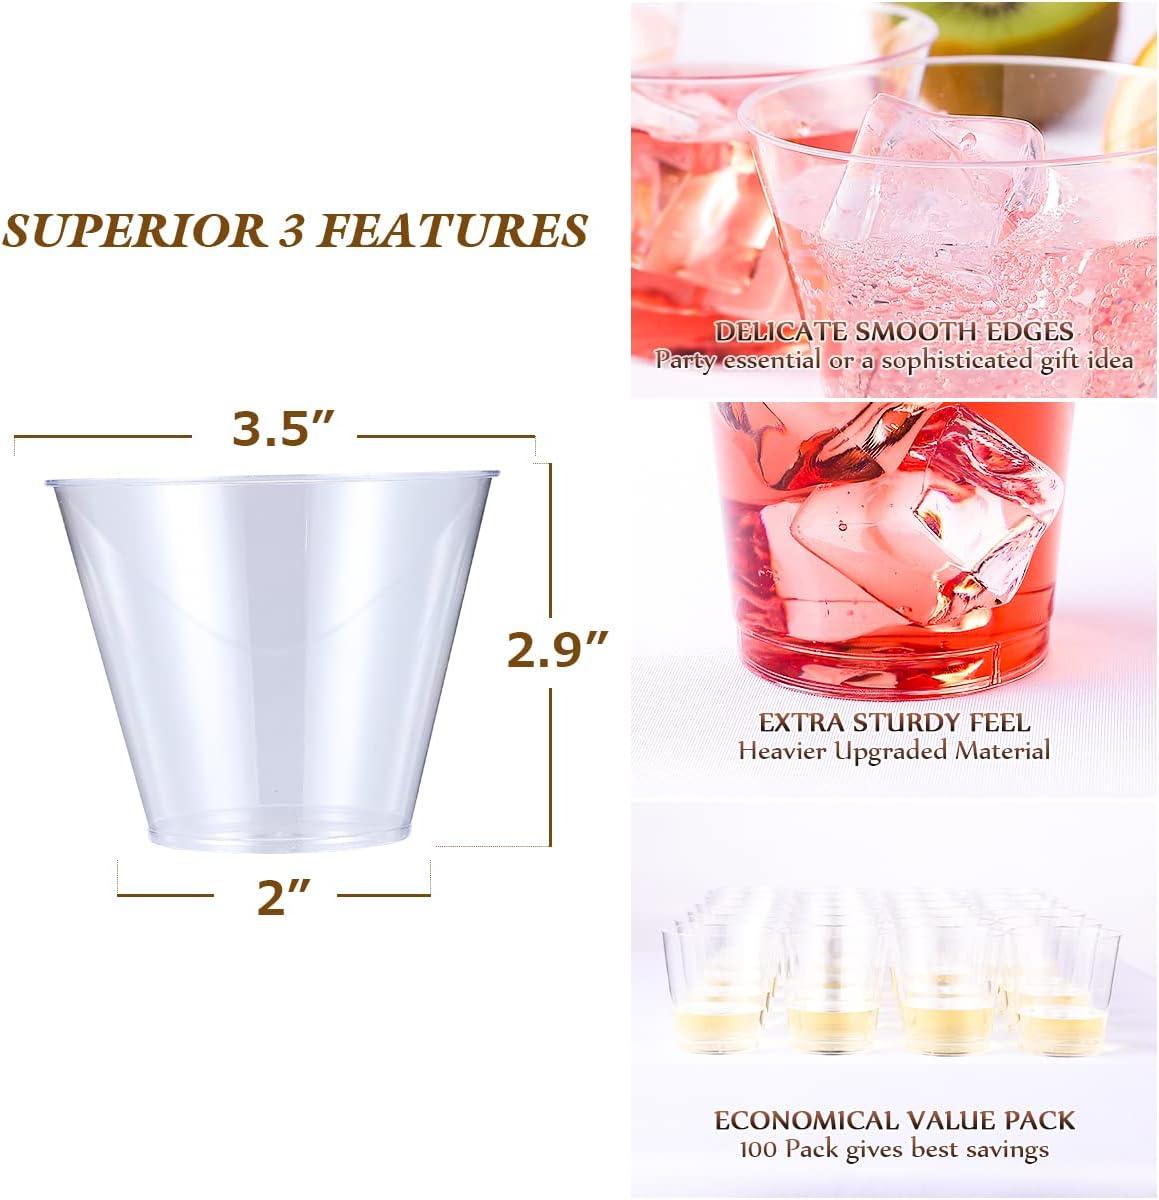 Exquisite 12 Ounce Disposable Pink Plastic Cups-50 Count